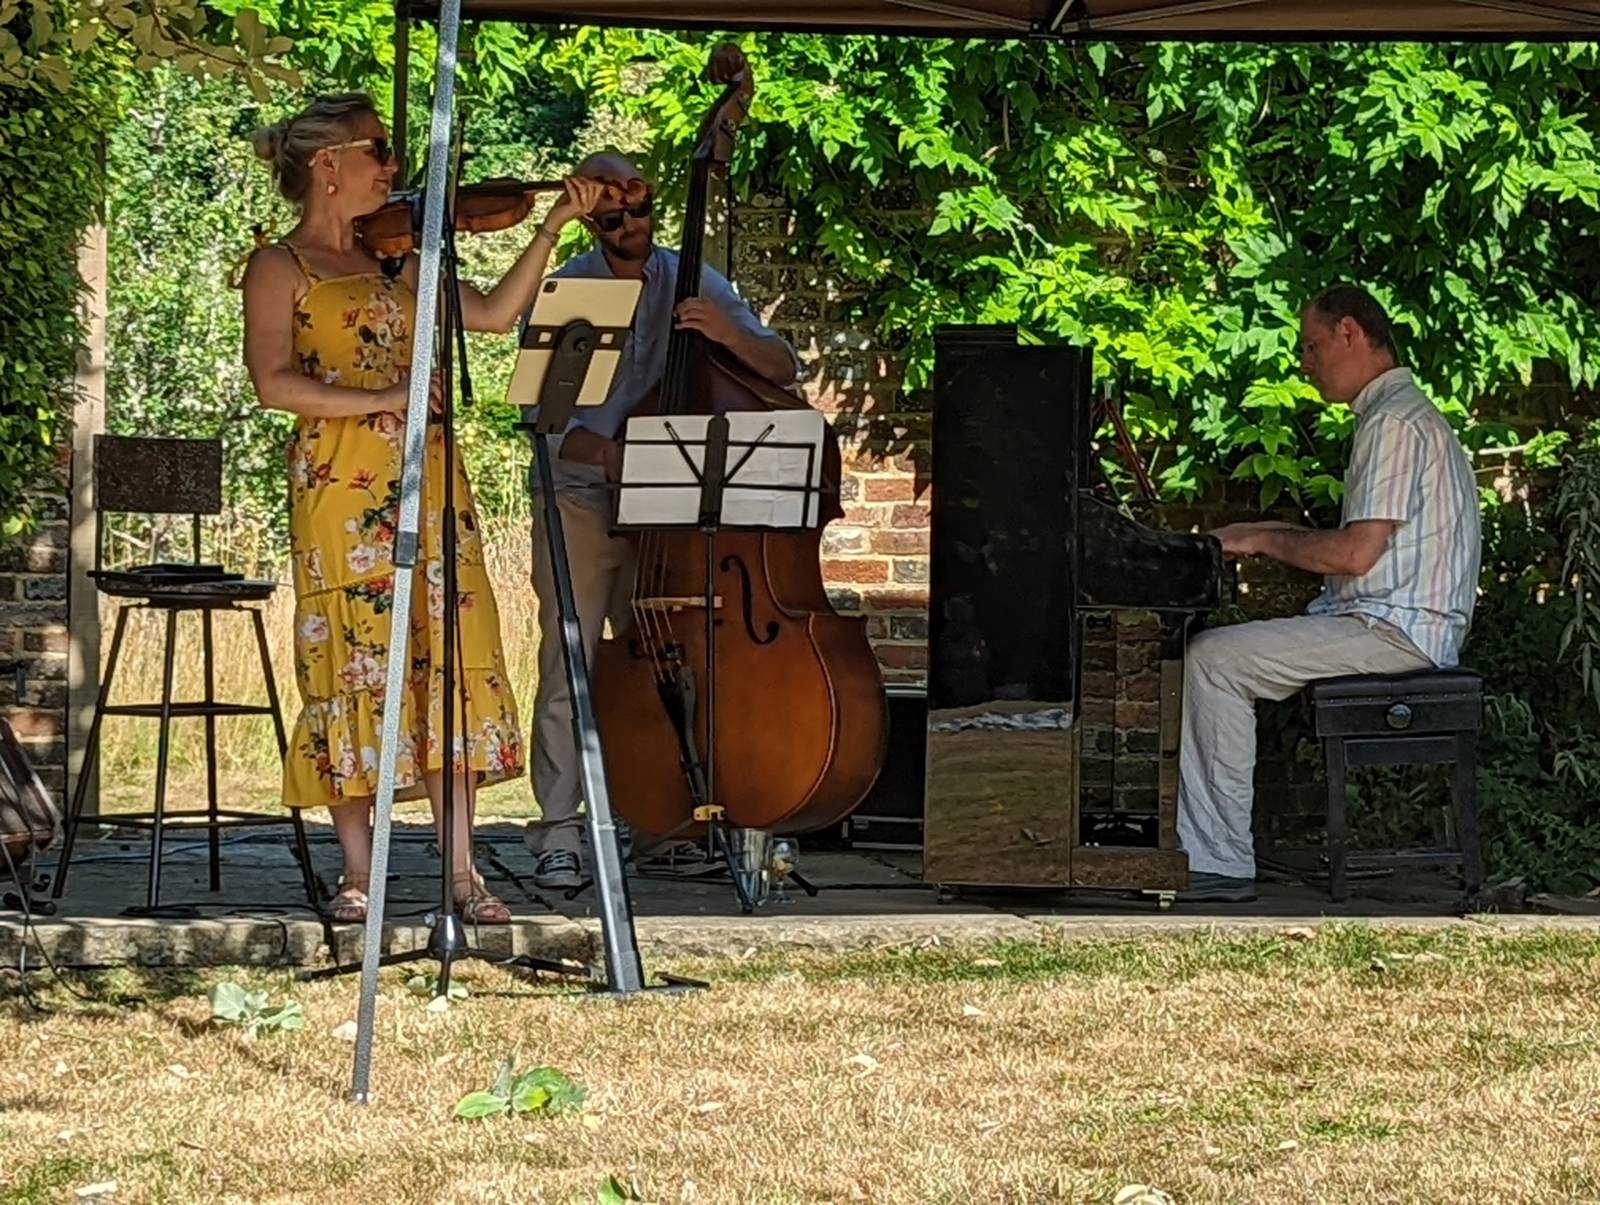 Jazz trio comprising of violinist, double bass and piano under a gazebo.